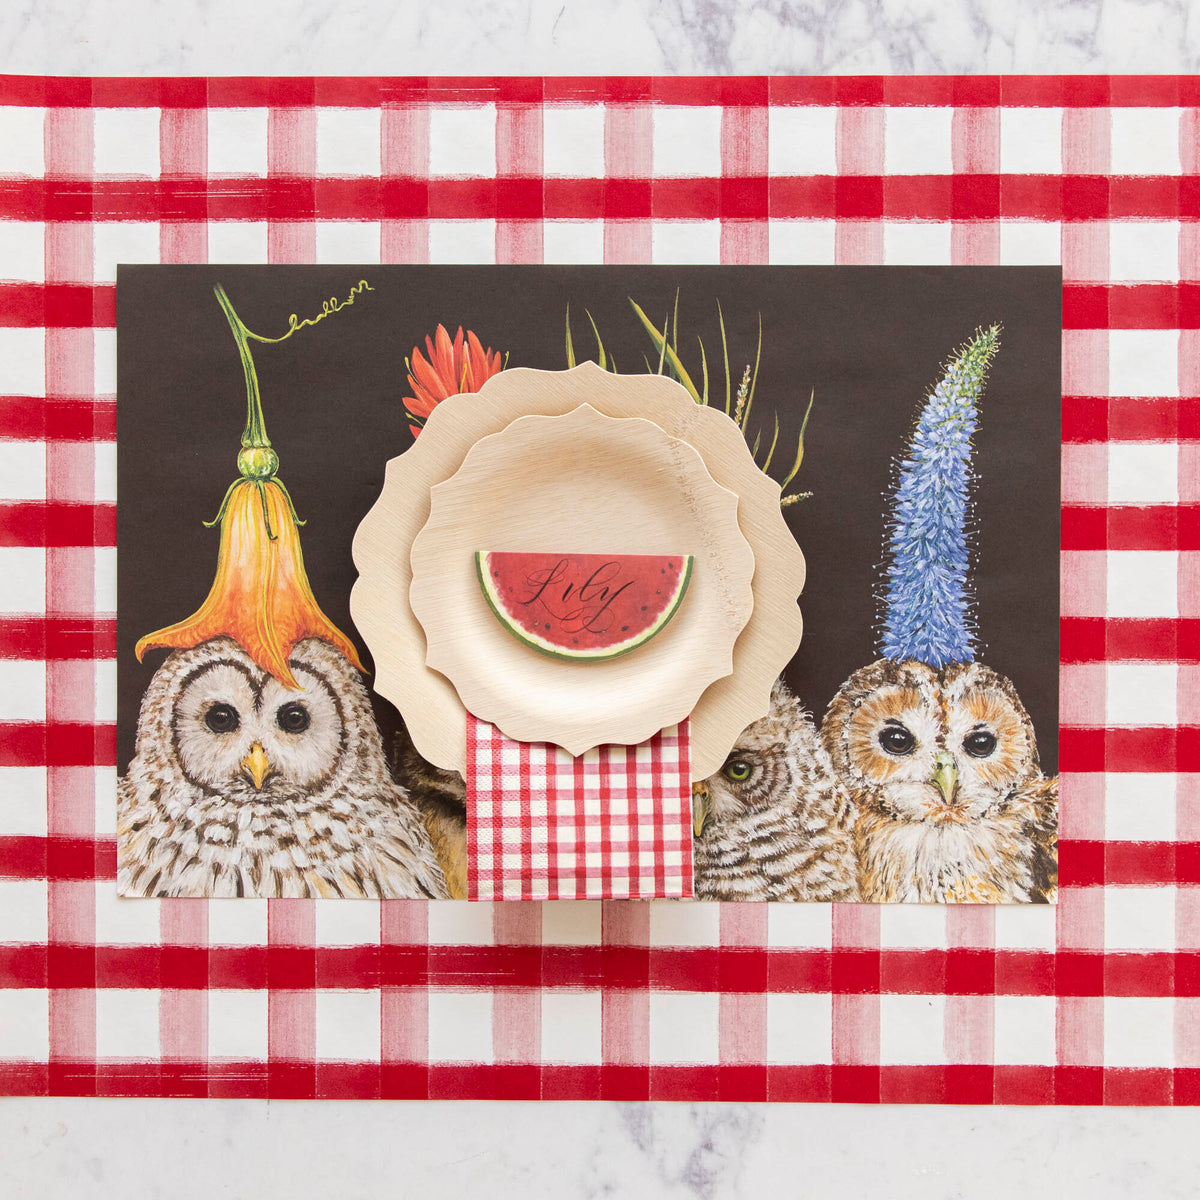 A picnic-style place setting featuring the Red Painted Guest Napkin on the plate.